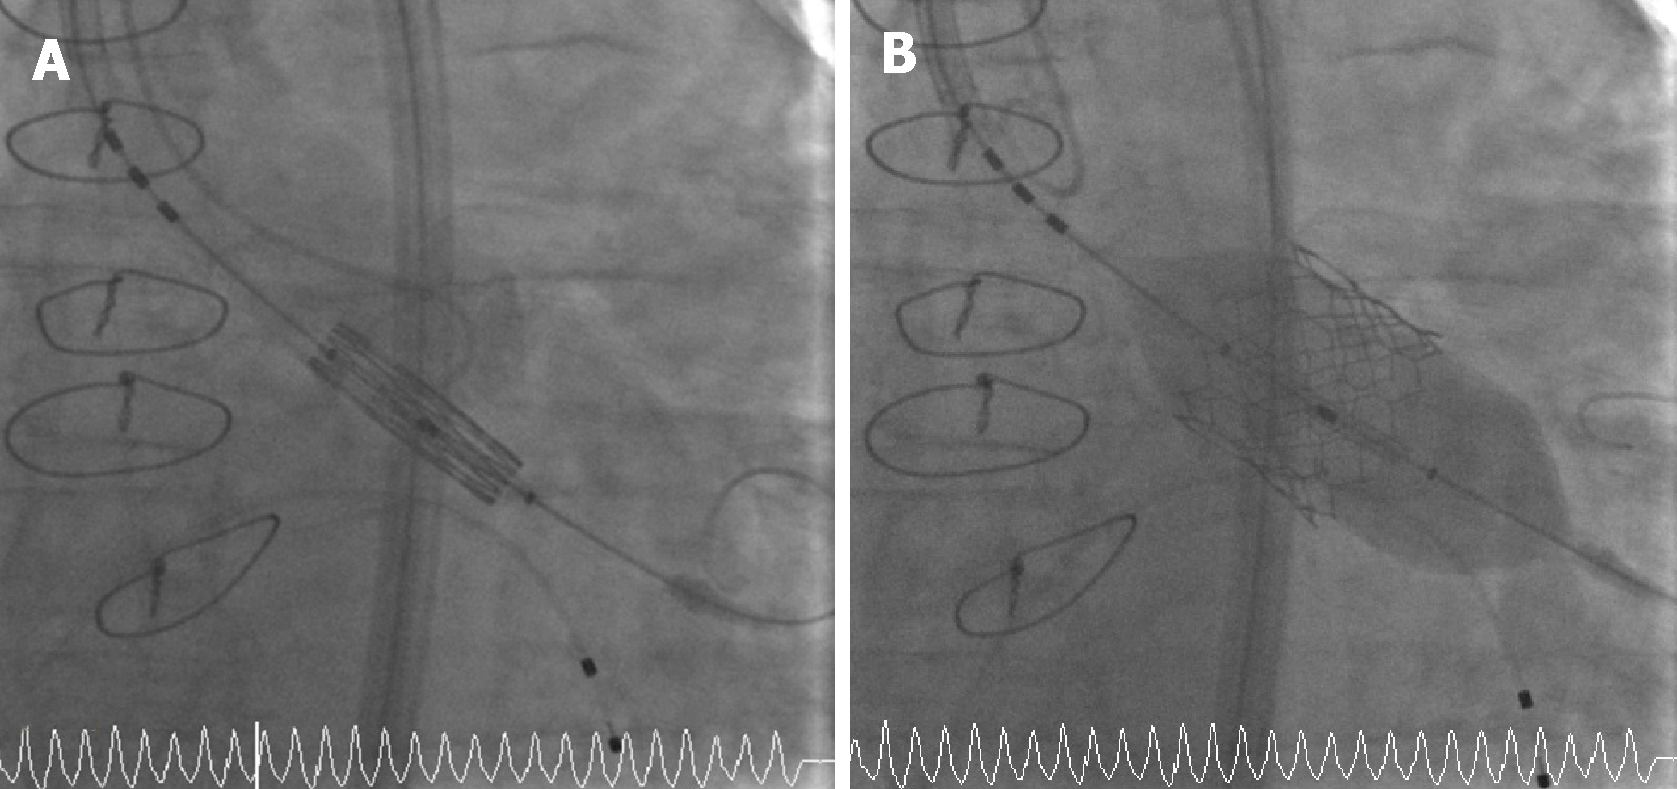 Successful Minimal Approach Transcatheter Aortic Valve Replacement In